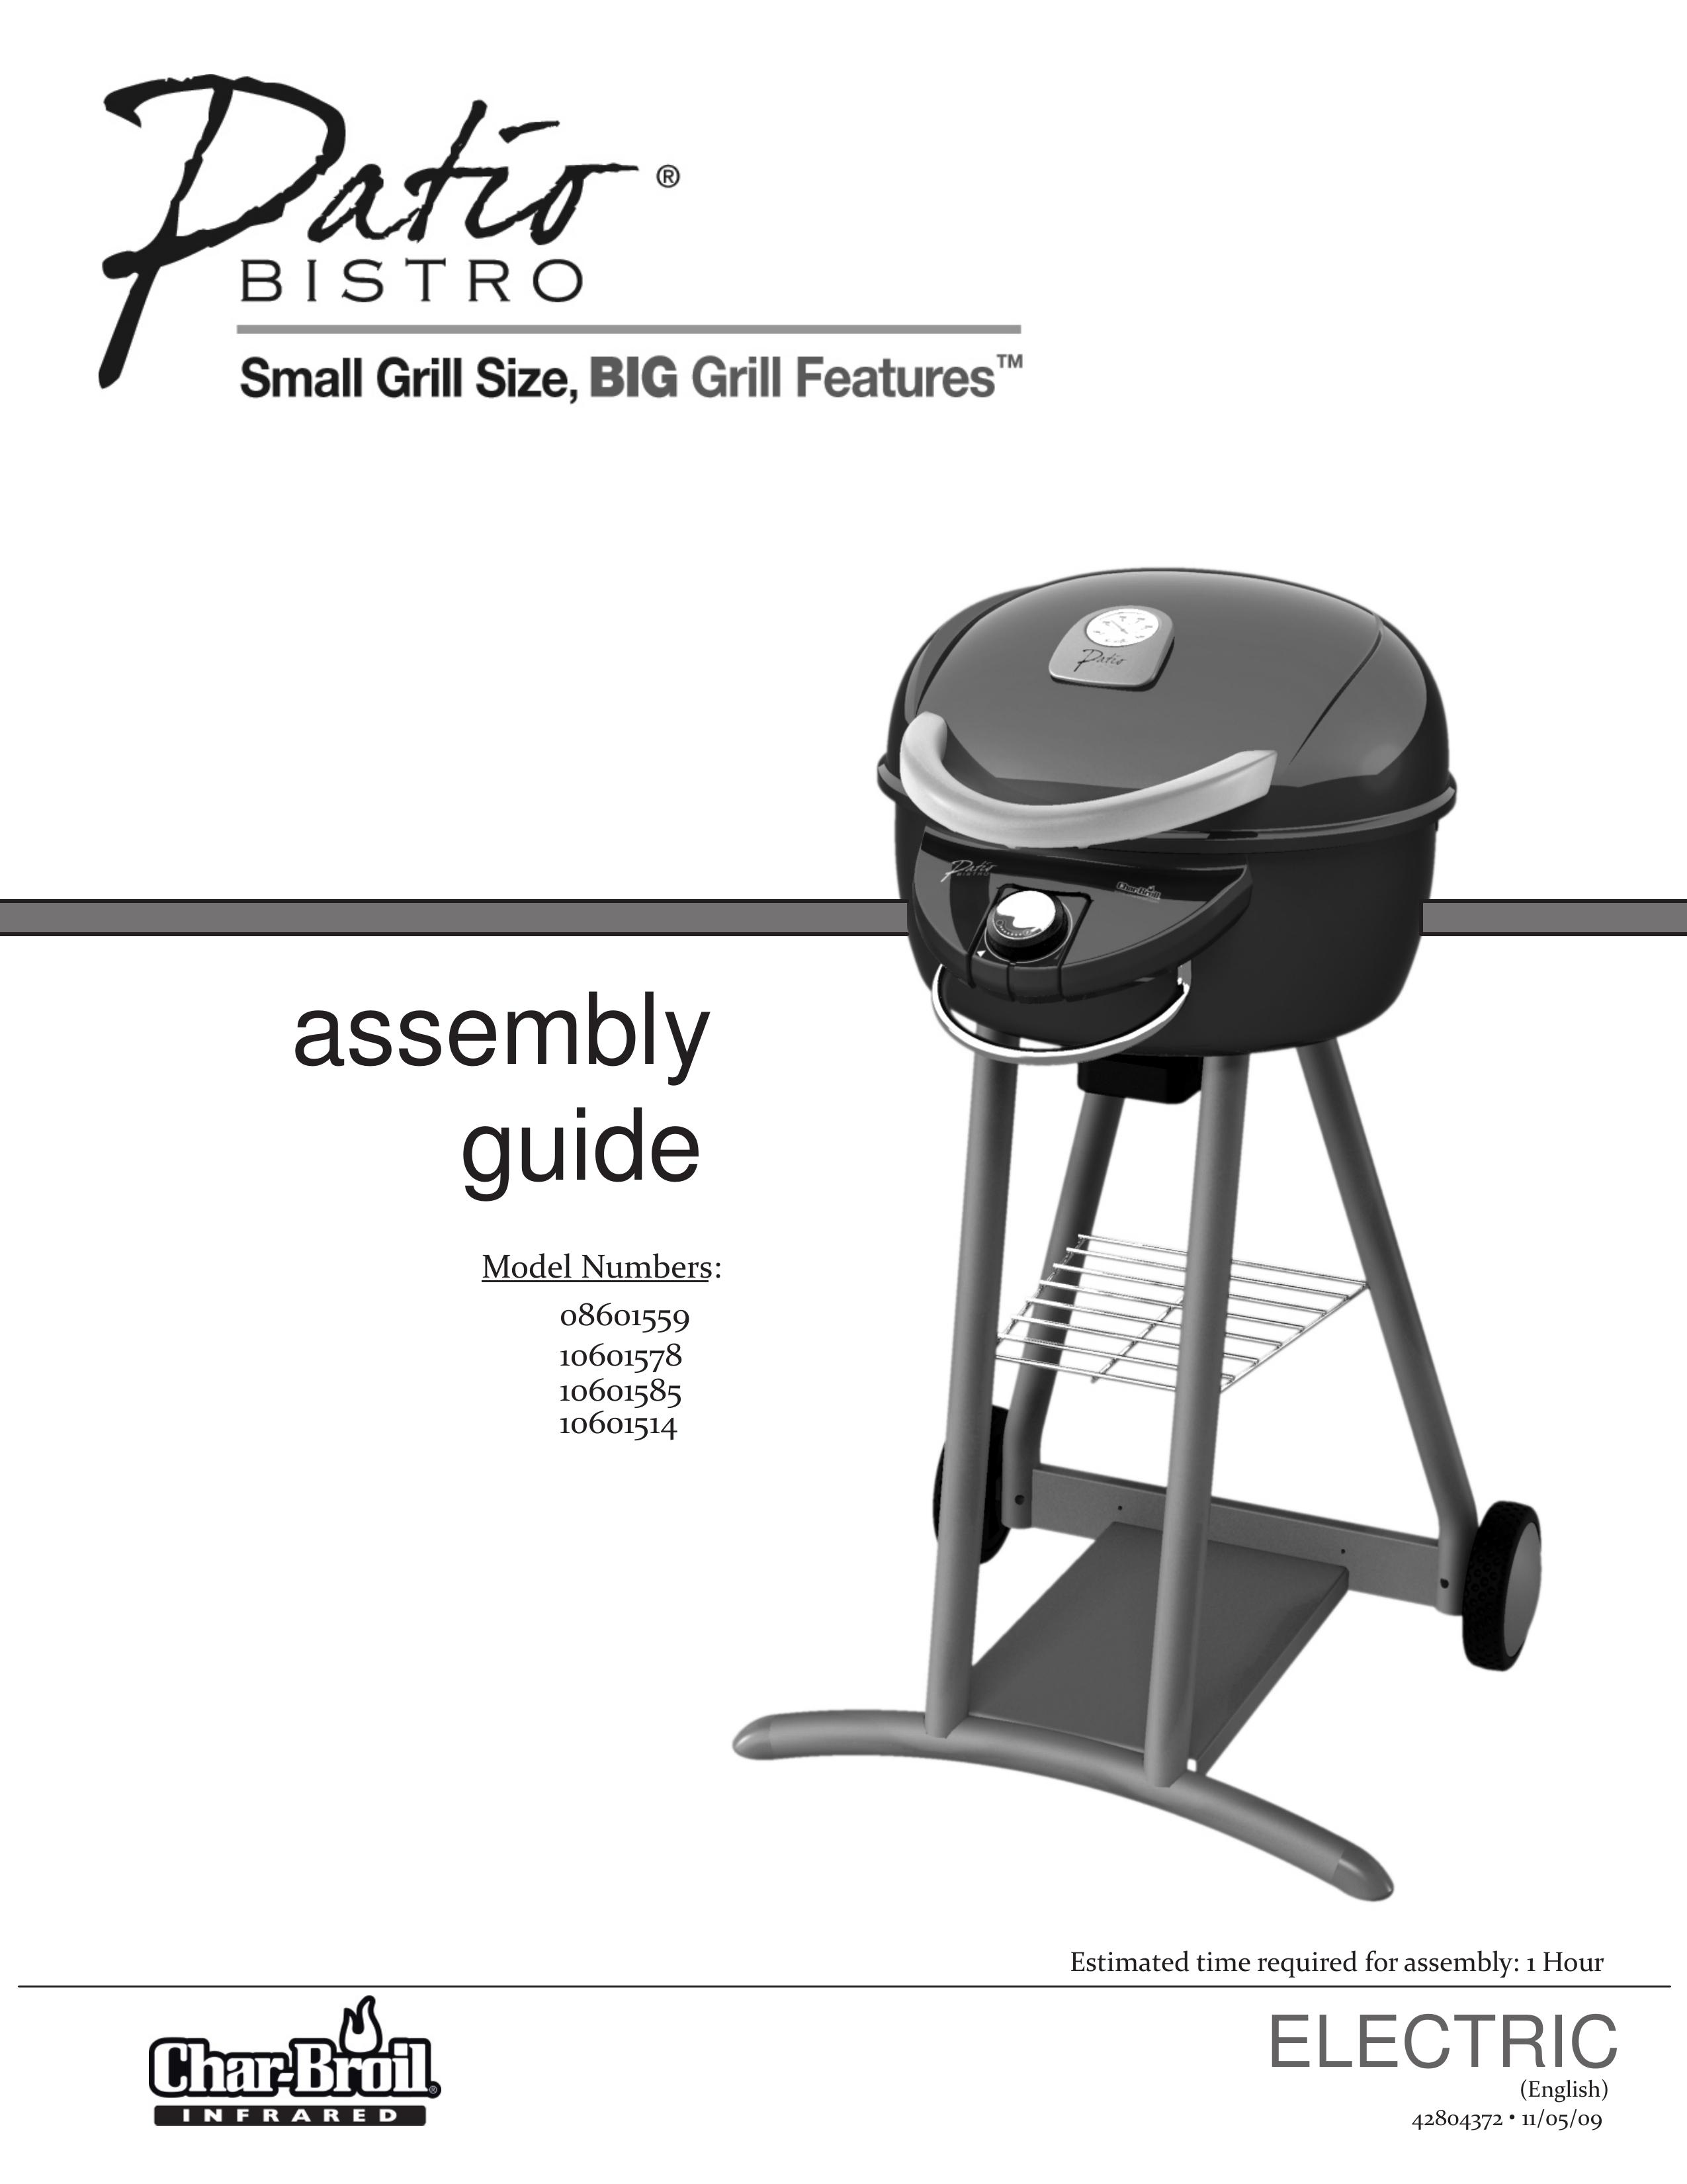 Char-Broil 10601585 Electric Grill User Manual